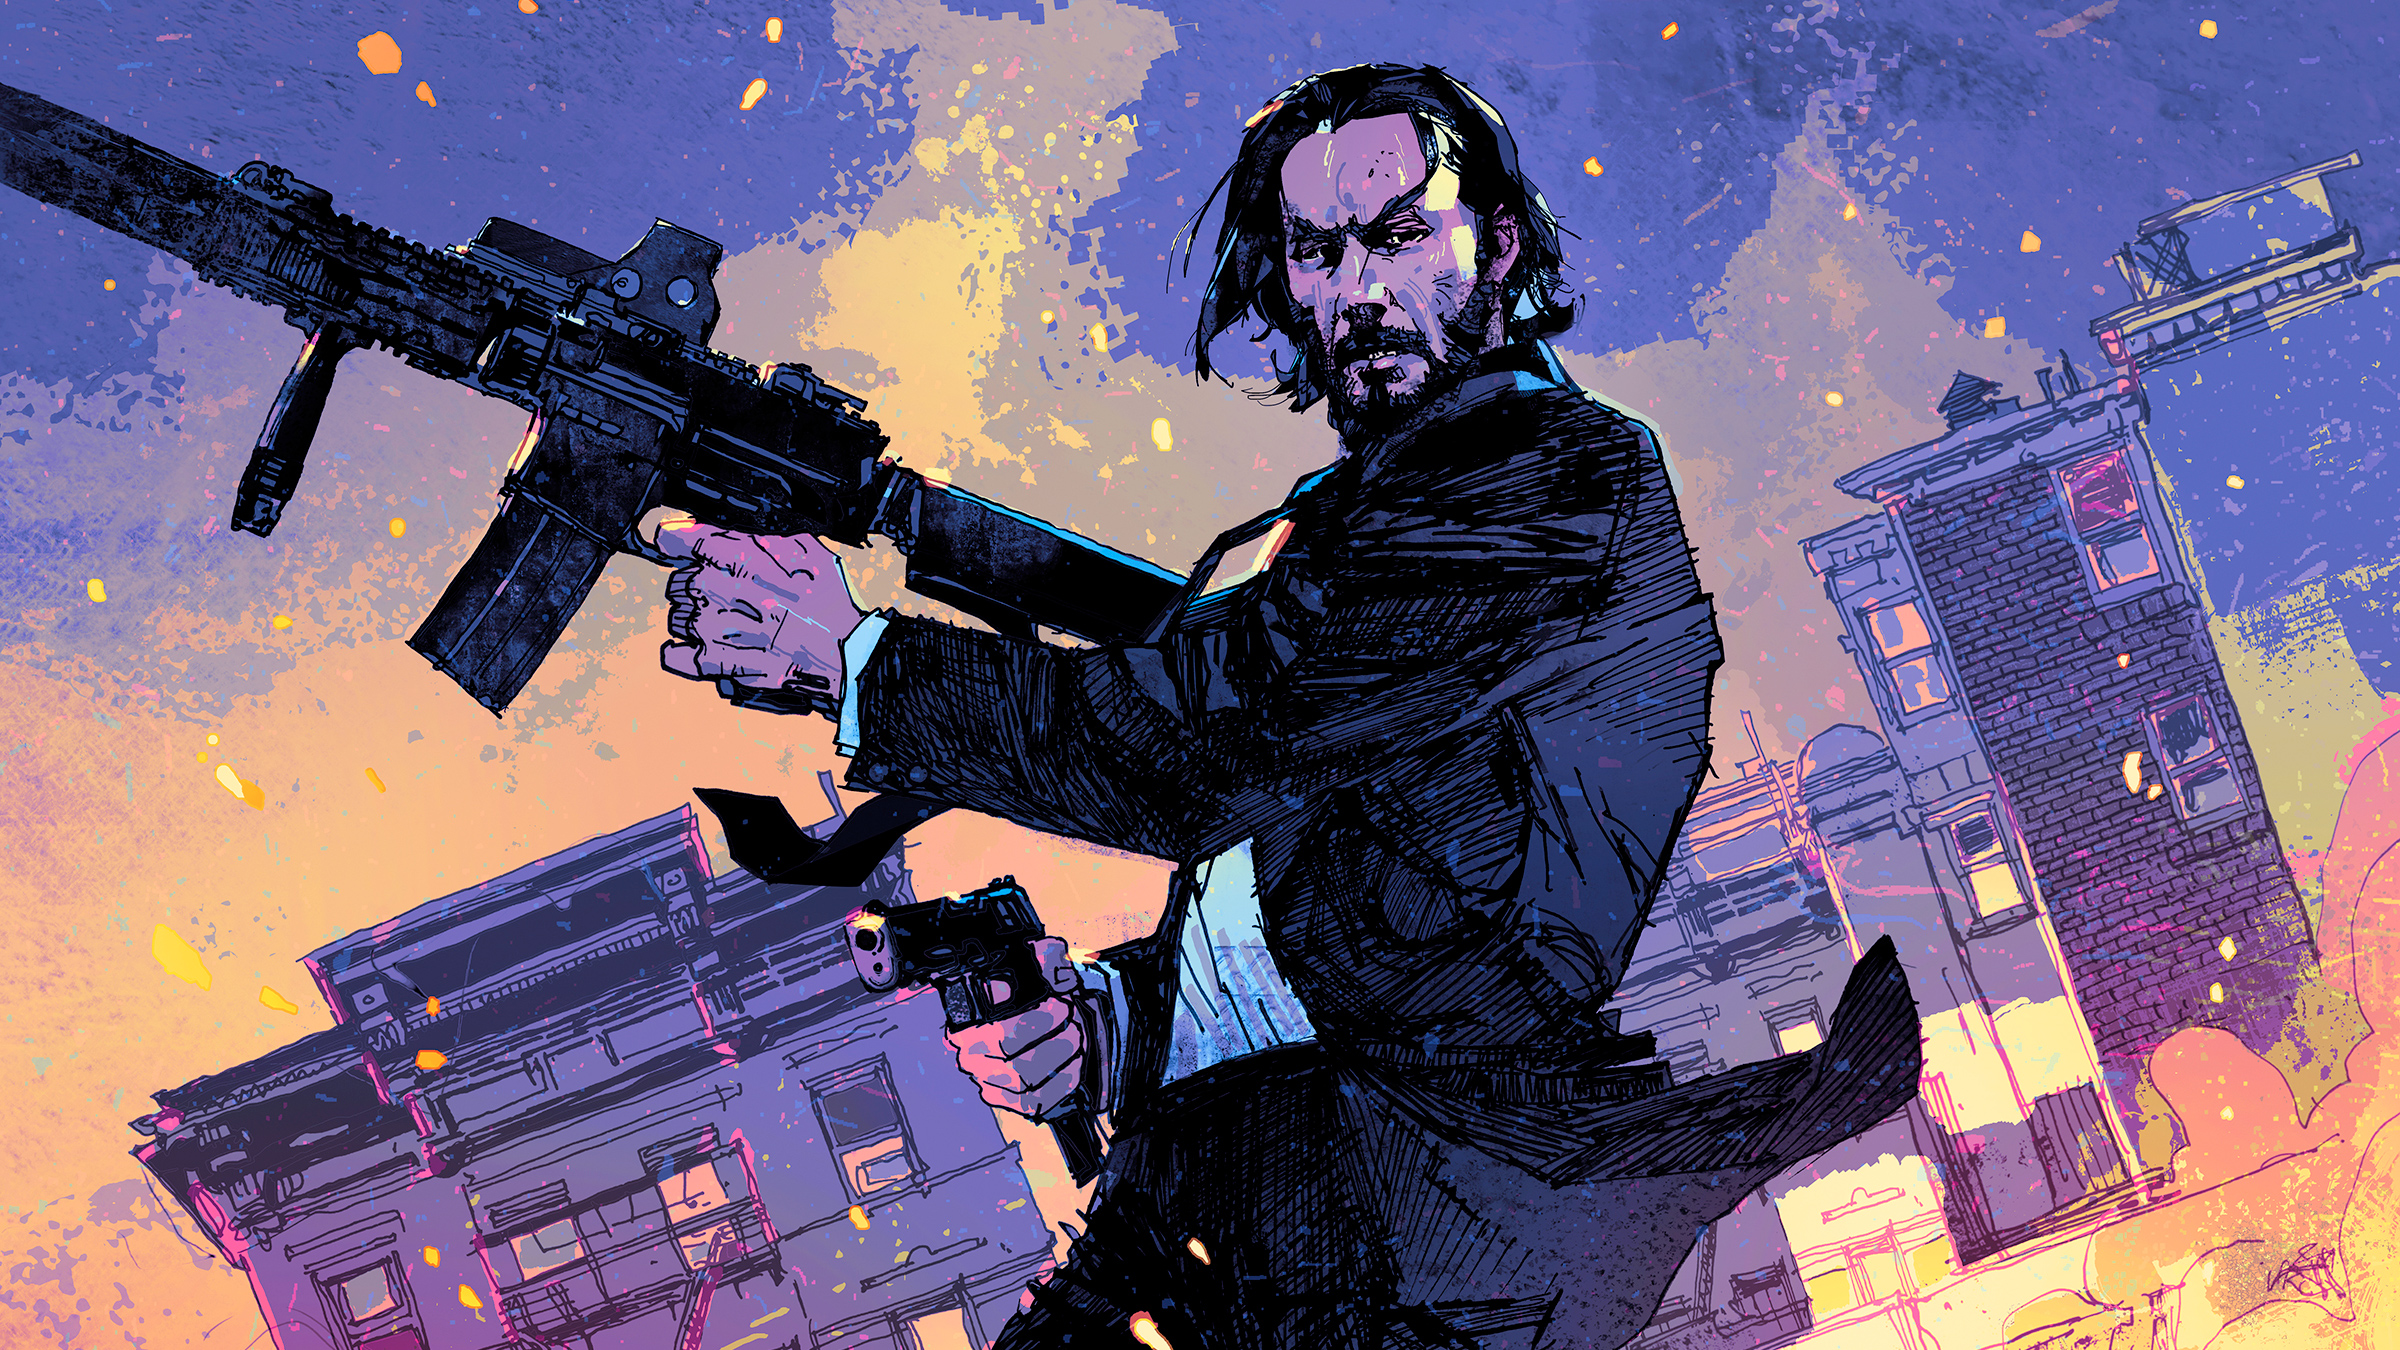 John Wick Illustration Hd Movies 4k Wallpapers Images